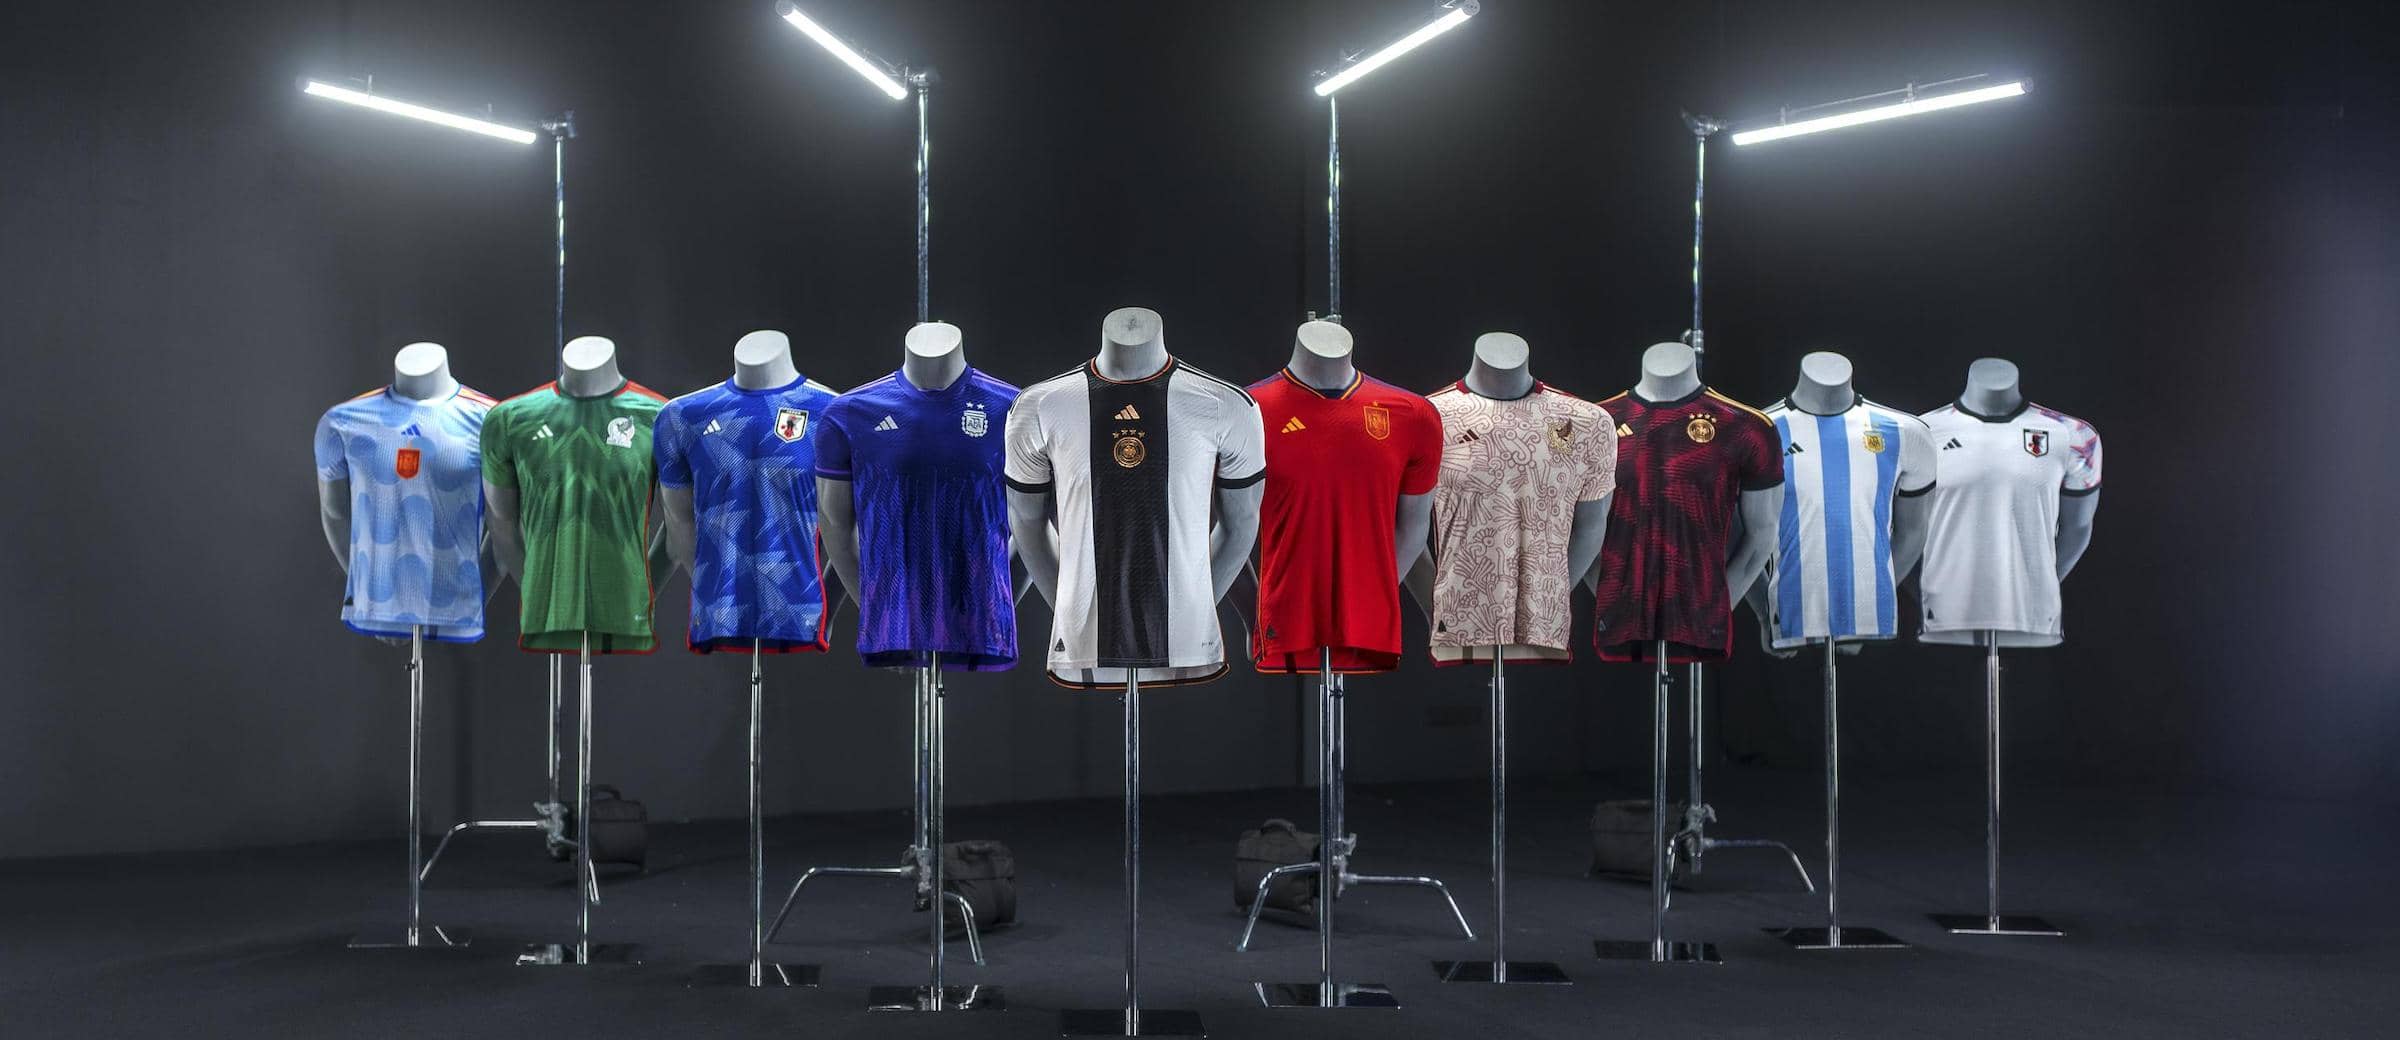 Adidas reveals its lineup of federation kits for the fifa world cup 2022™